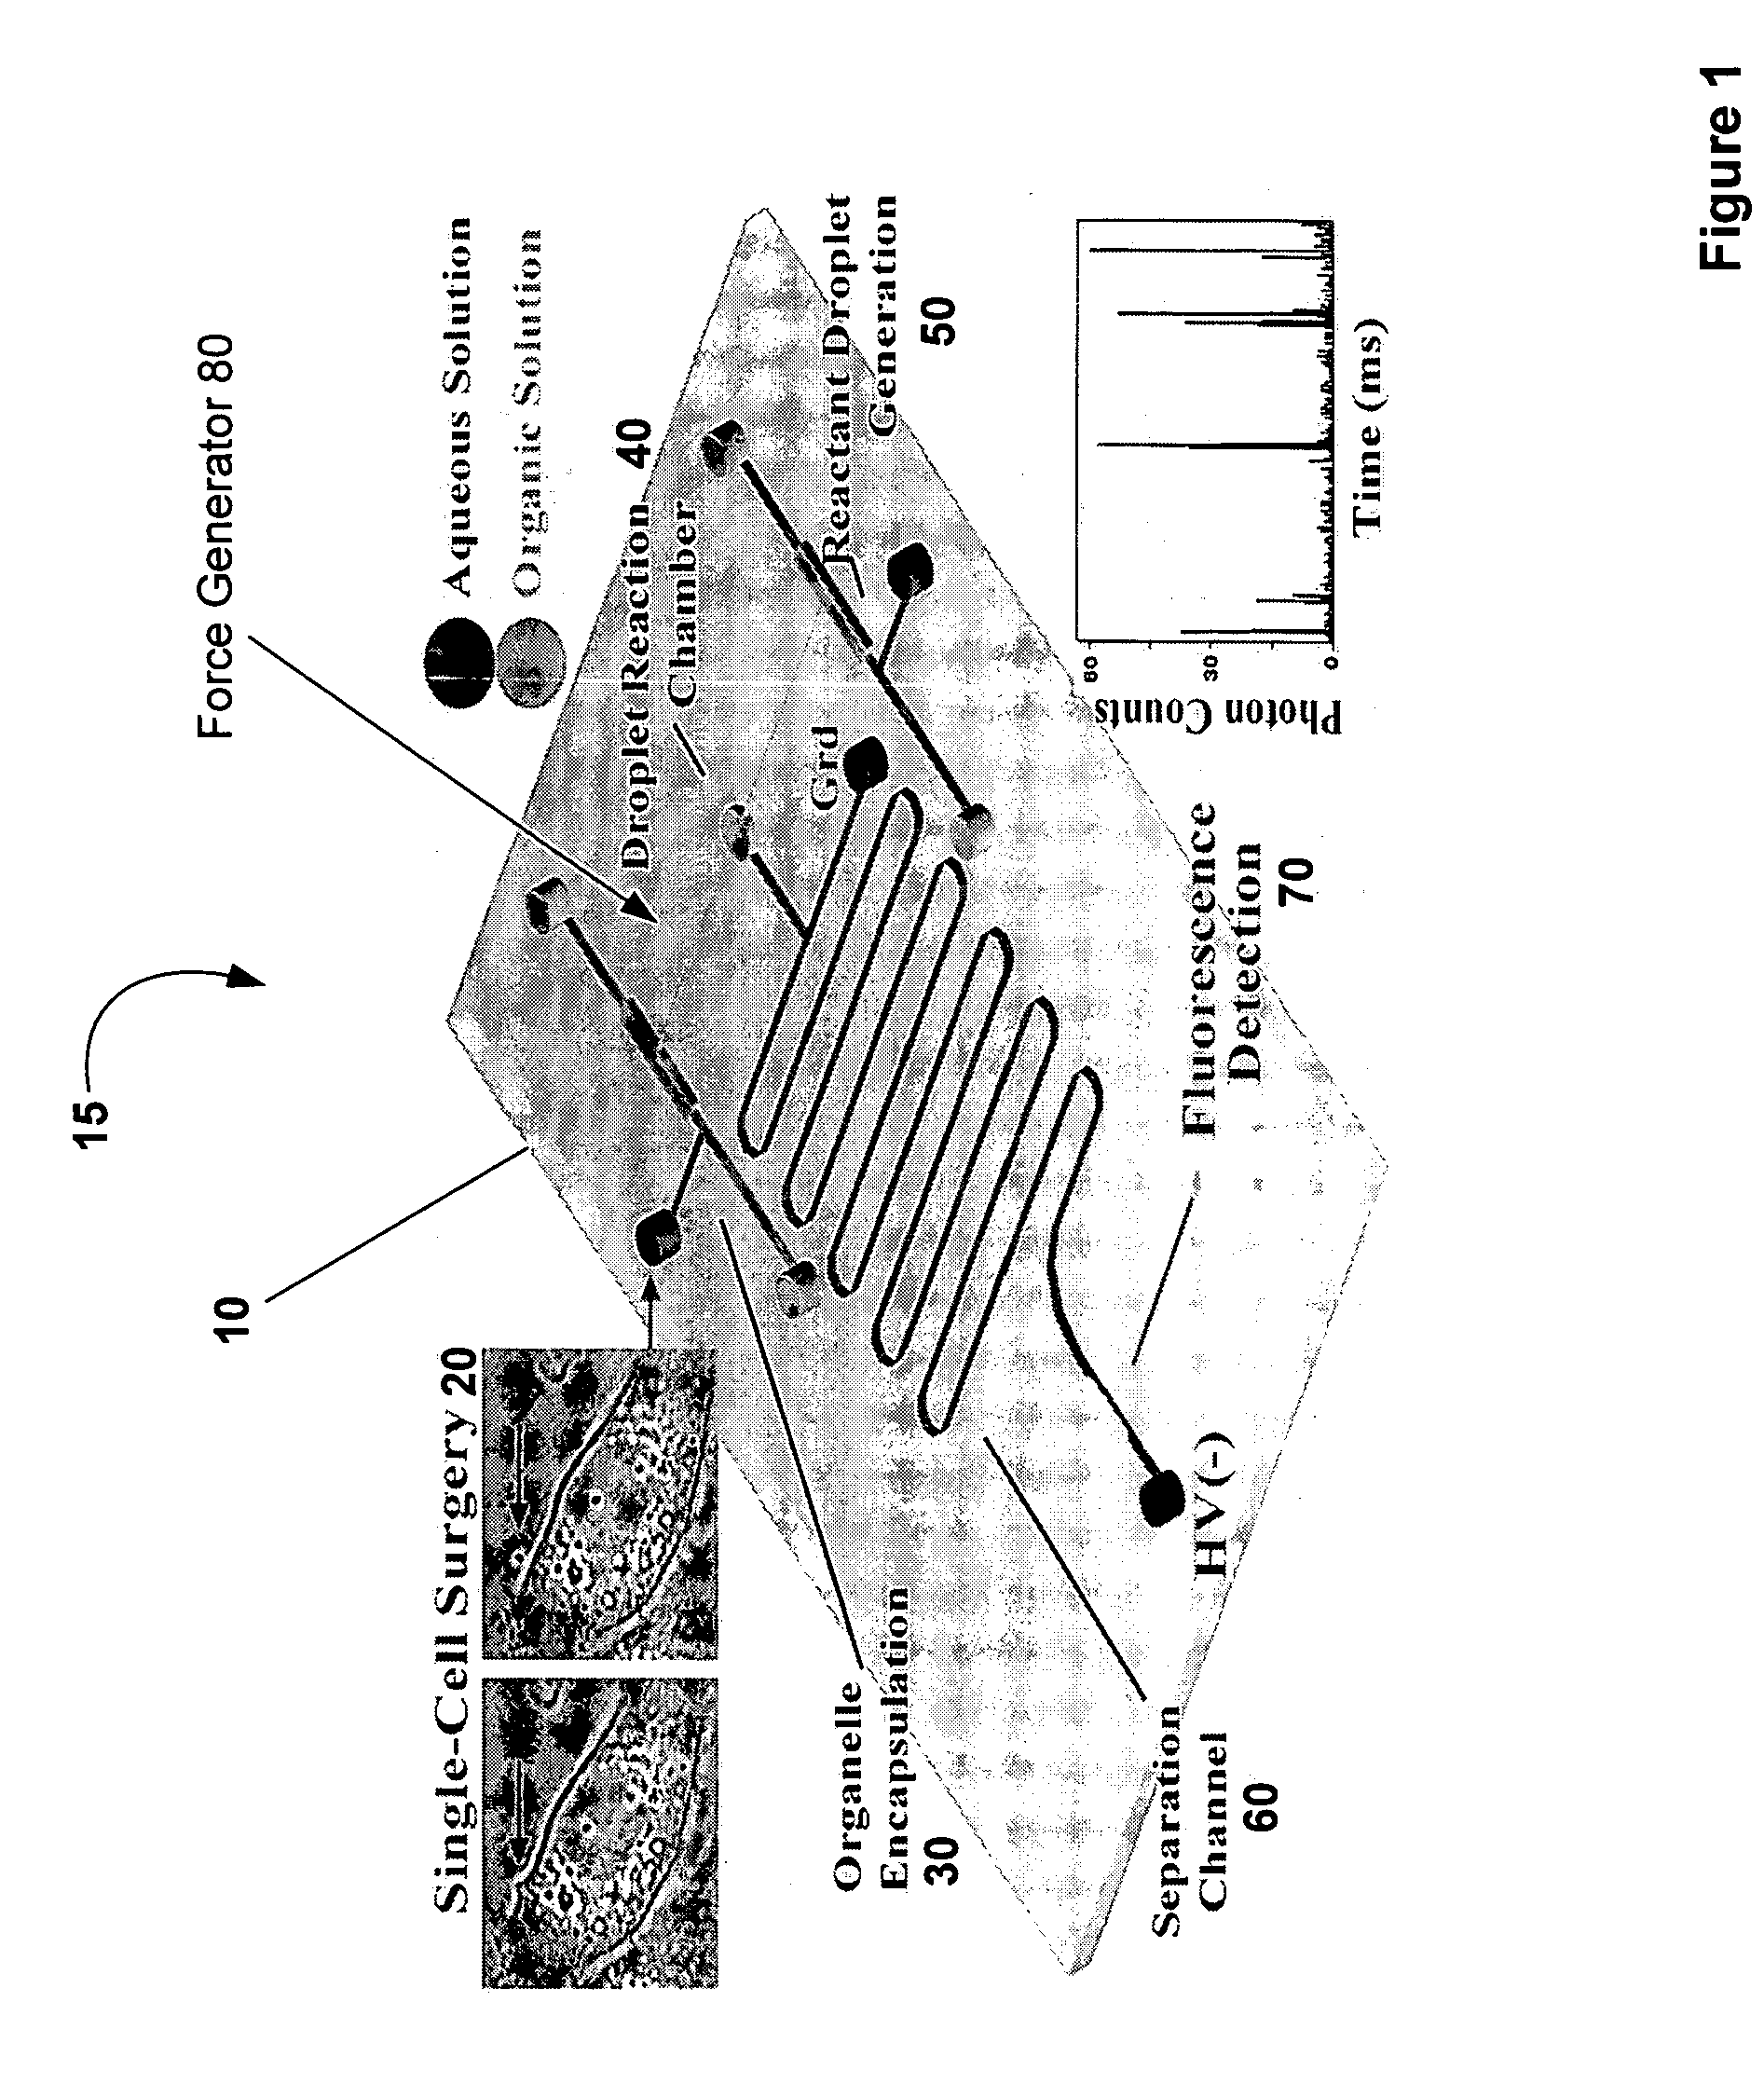 Method and device for biochemical detection and analysis of subcellular compartments from a single cell